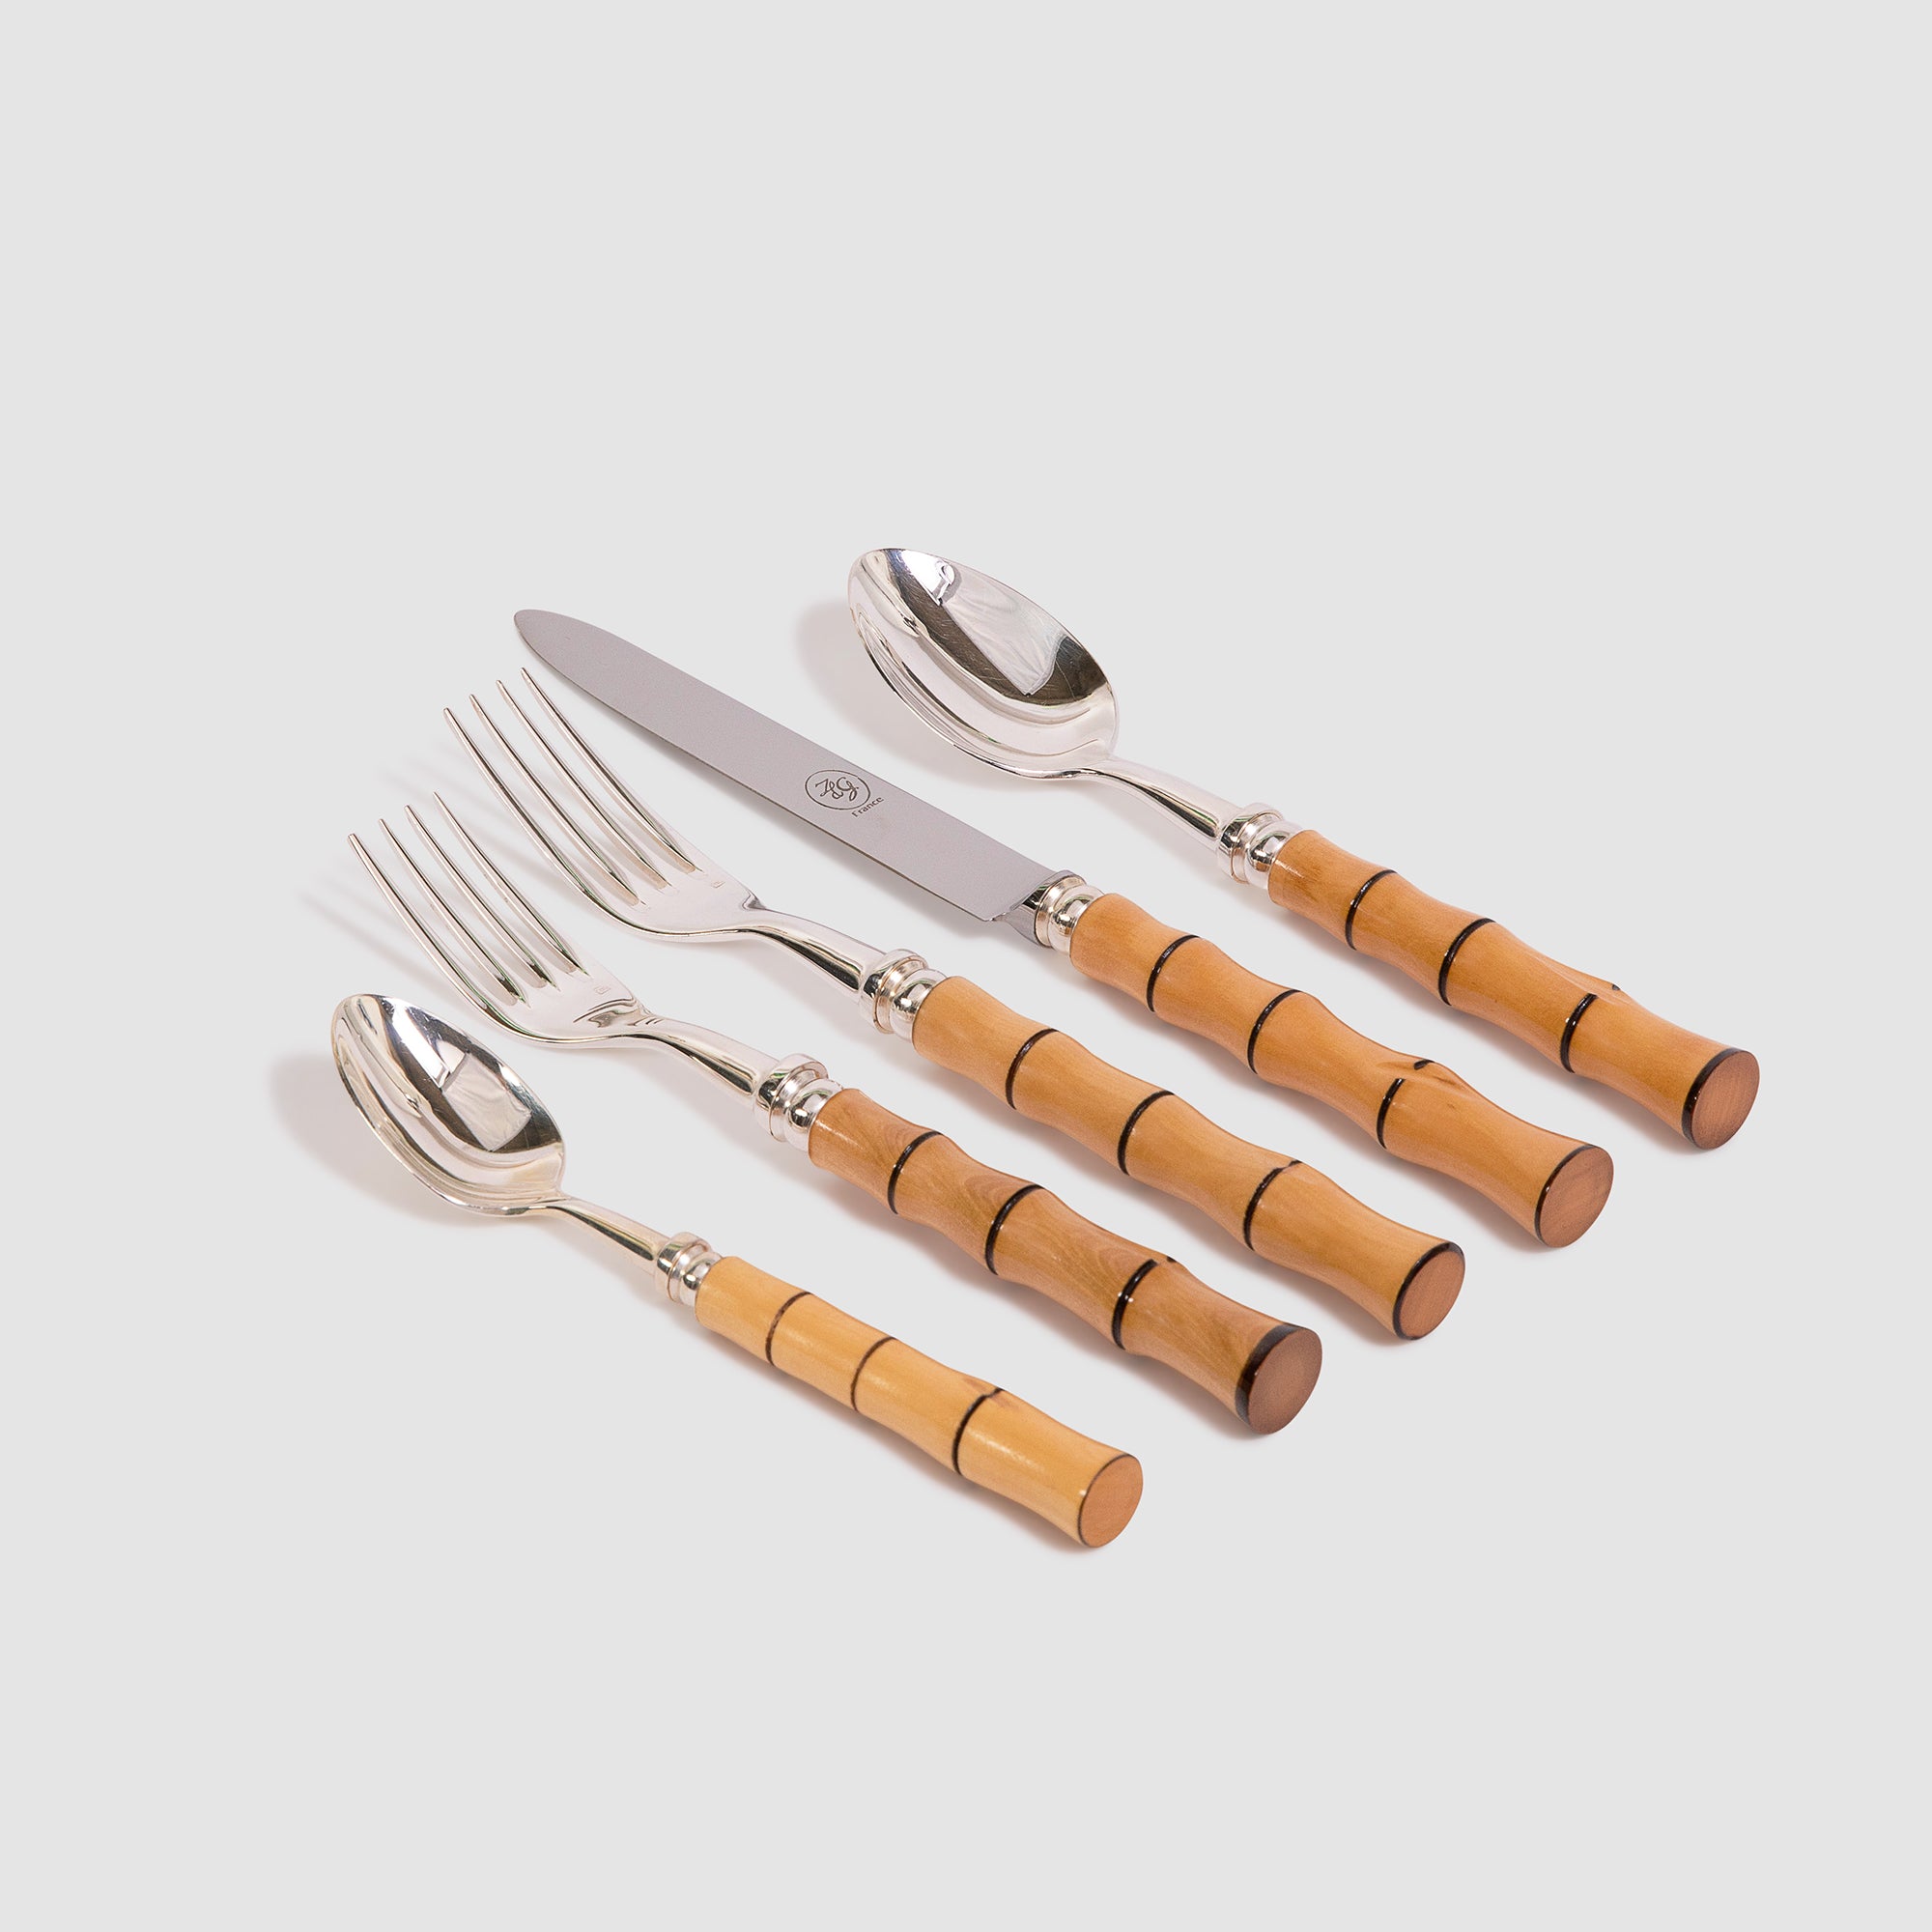 Banyan 5pc Silver Plated Cutlery Set Carved in the Style of Bamboo